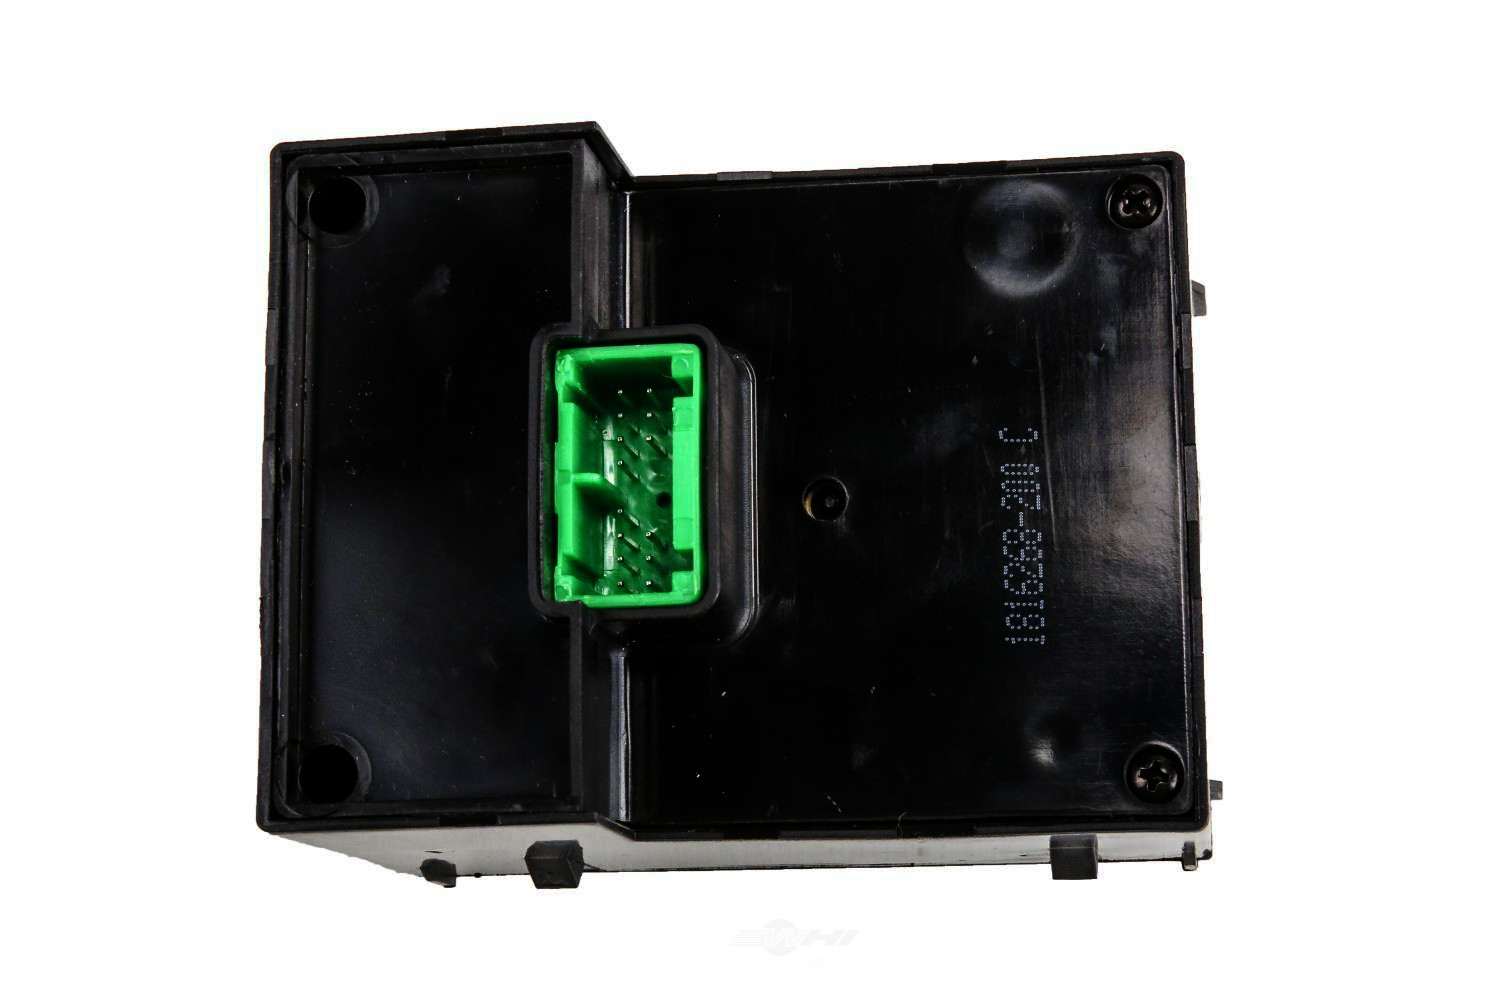 GM GENUINE PARTS - Headlight / Instrument Panel Dimmer and Dome Light Switch - GMP 19381535